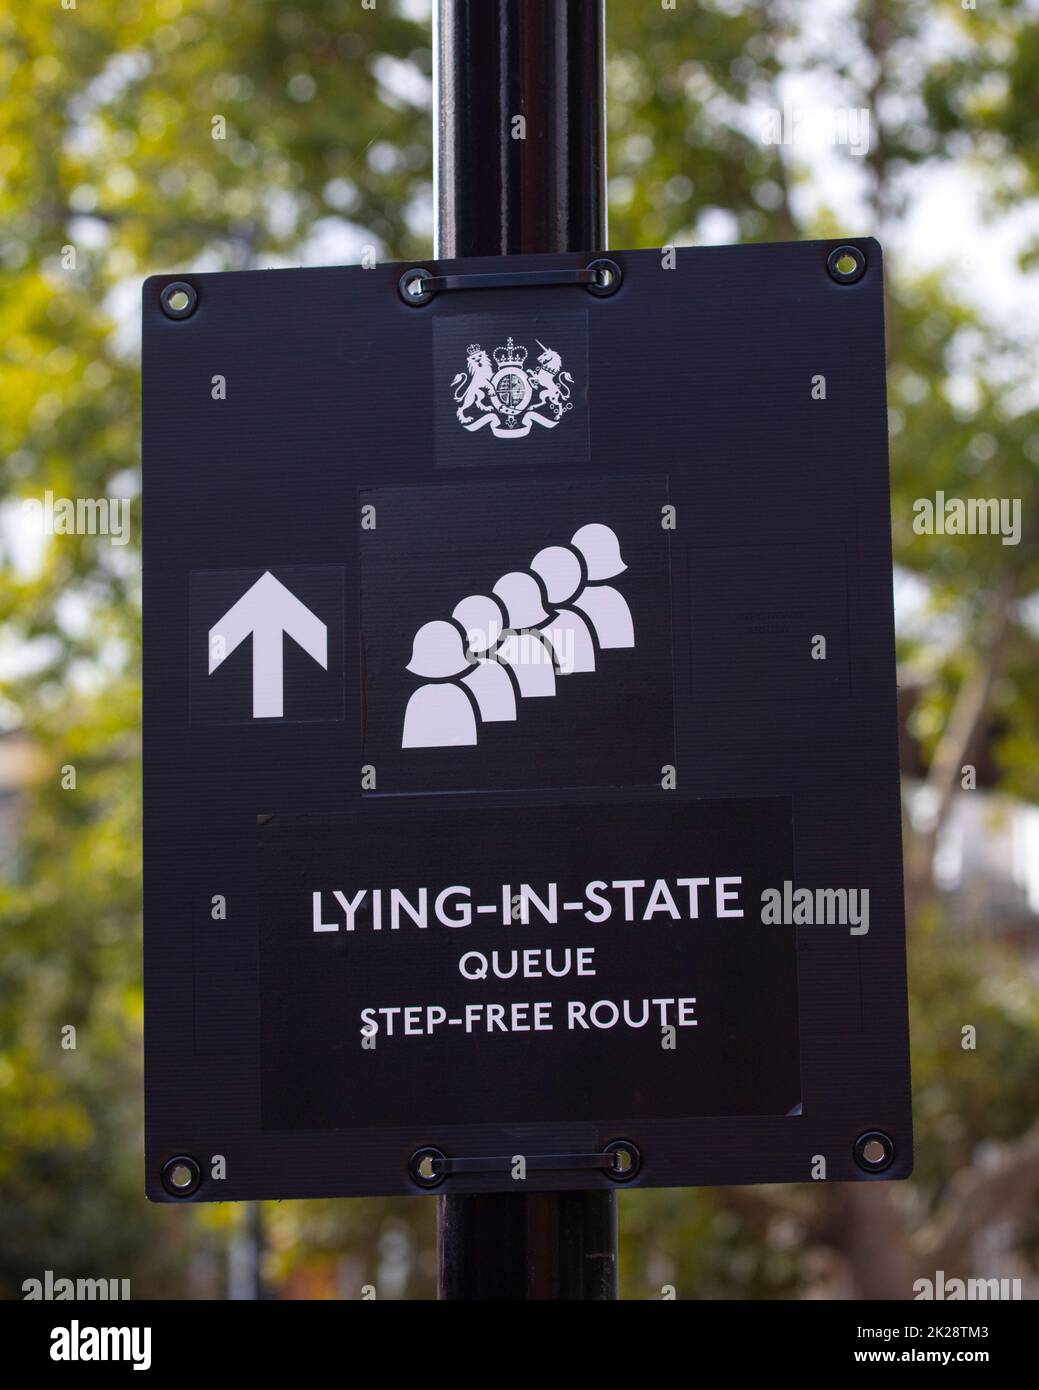 London, UK - September 14th 2022: A sign showing the direction for the public who wish to queue for Her Majesty Queen Elizabeth II Lying-in-State in W Stock Photo